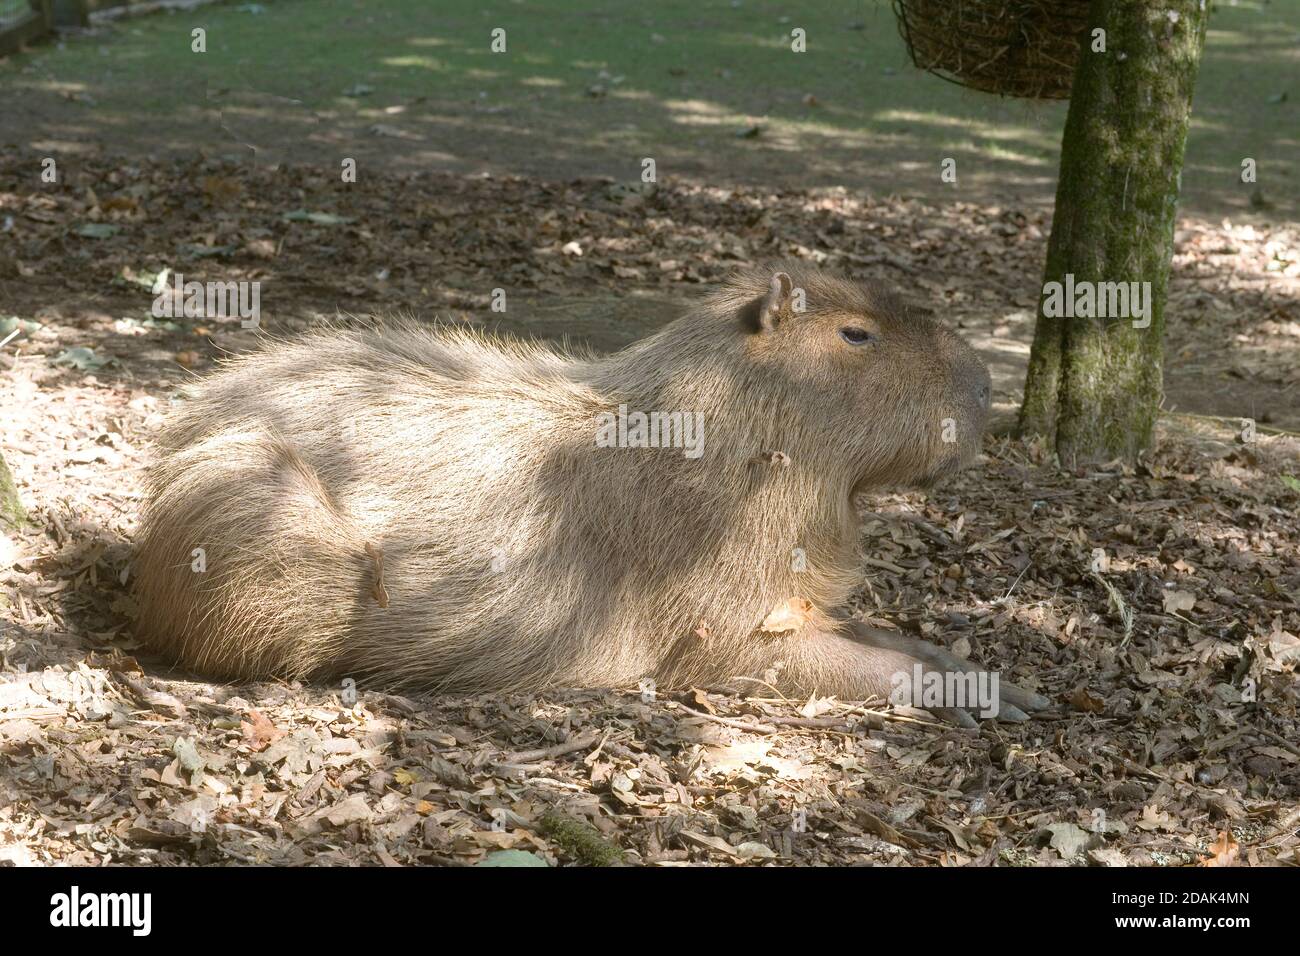 Capybara on bed of fallen leaves at Cotswold Wildlife park Stock Photo